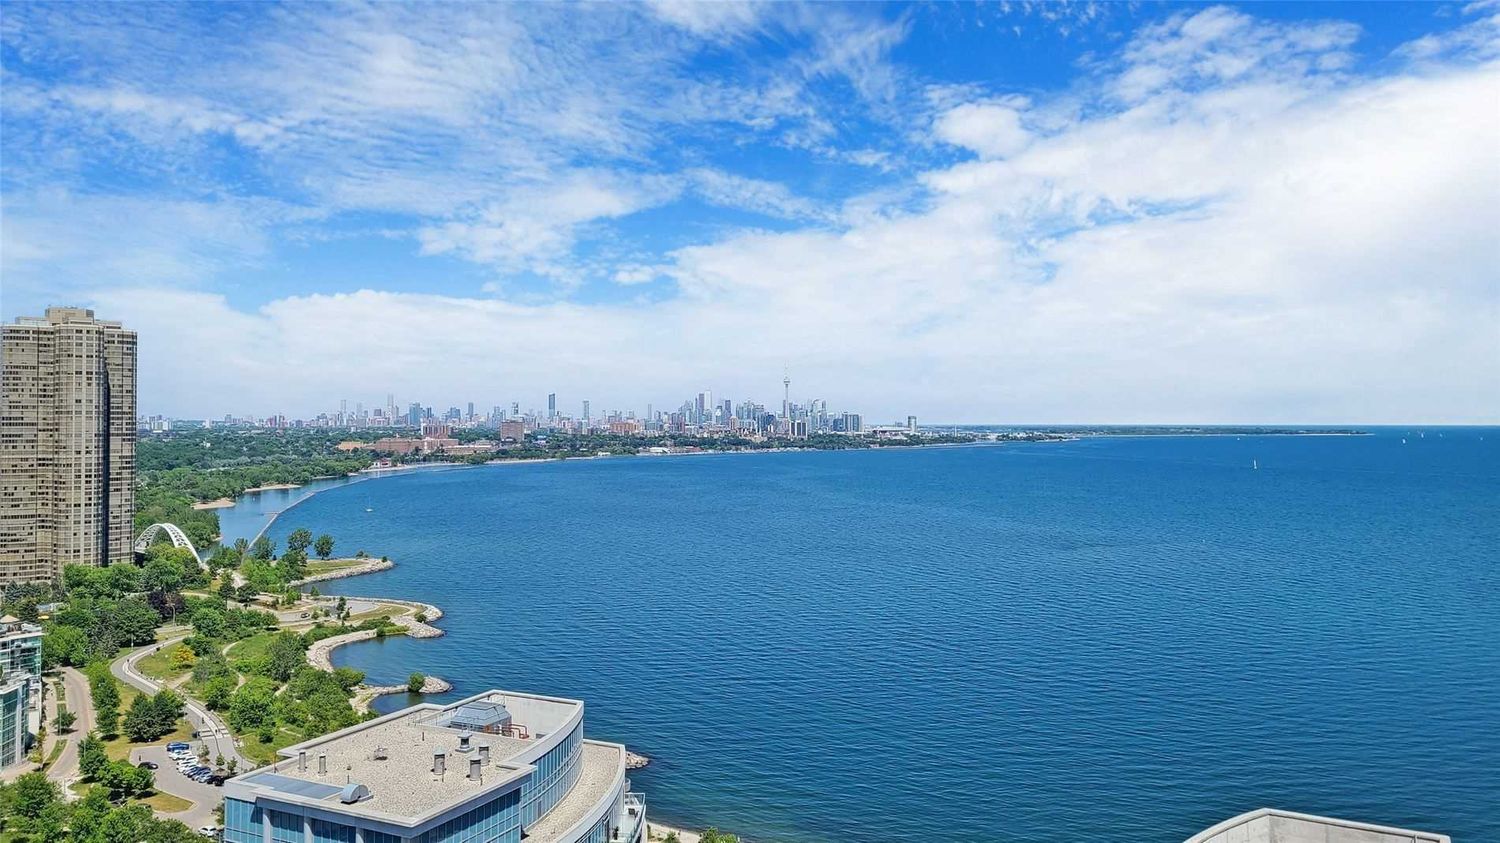 2121 Lake Shore Boulevard W. Voyager I at Waterview Condos is located in  Etobicoke, Toronto - image #4 of 13